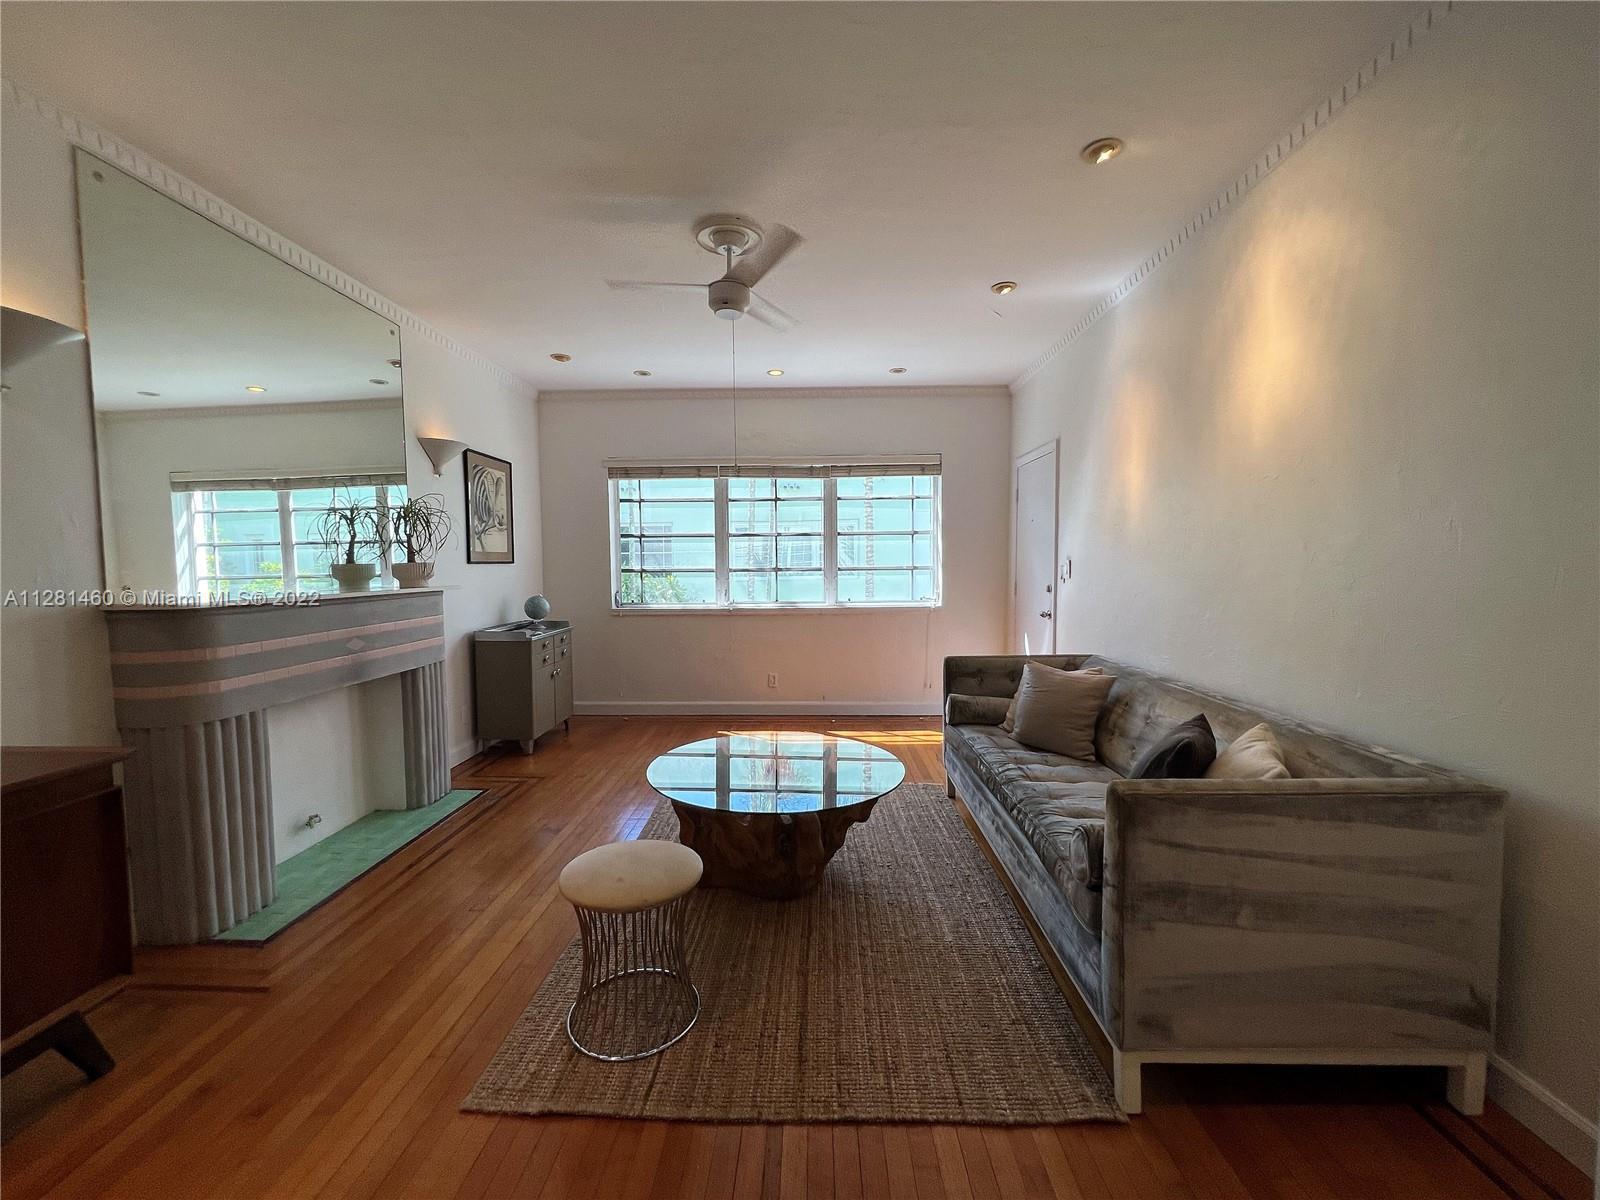 One of the most beautiful examples of an Art Deco in all of South Beach. This spacious one bedroom r